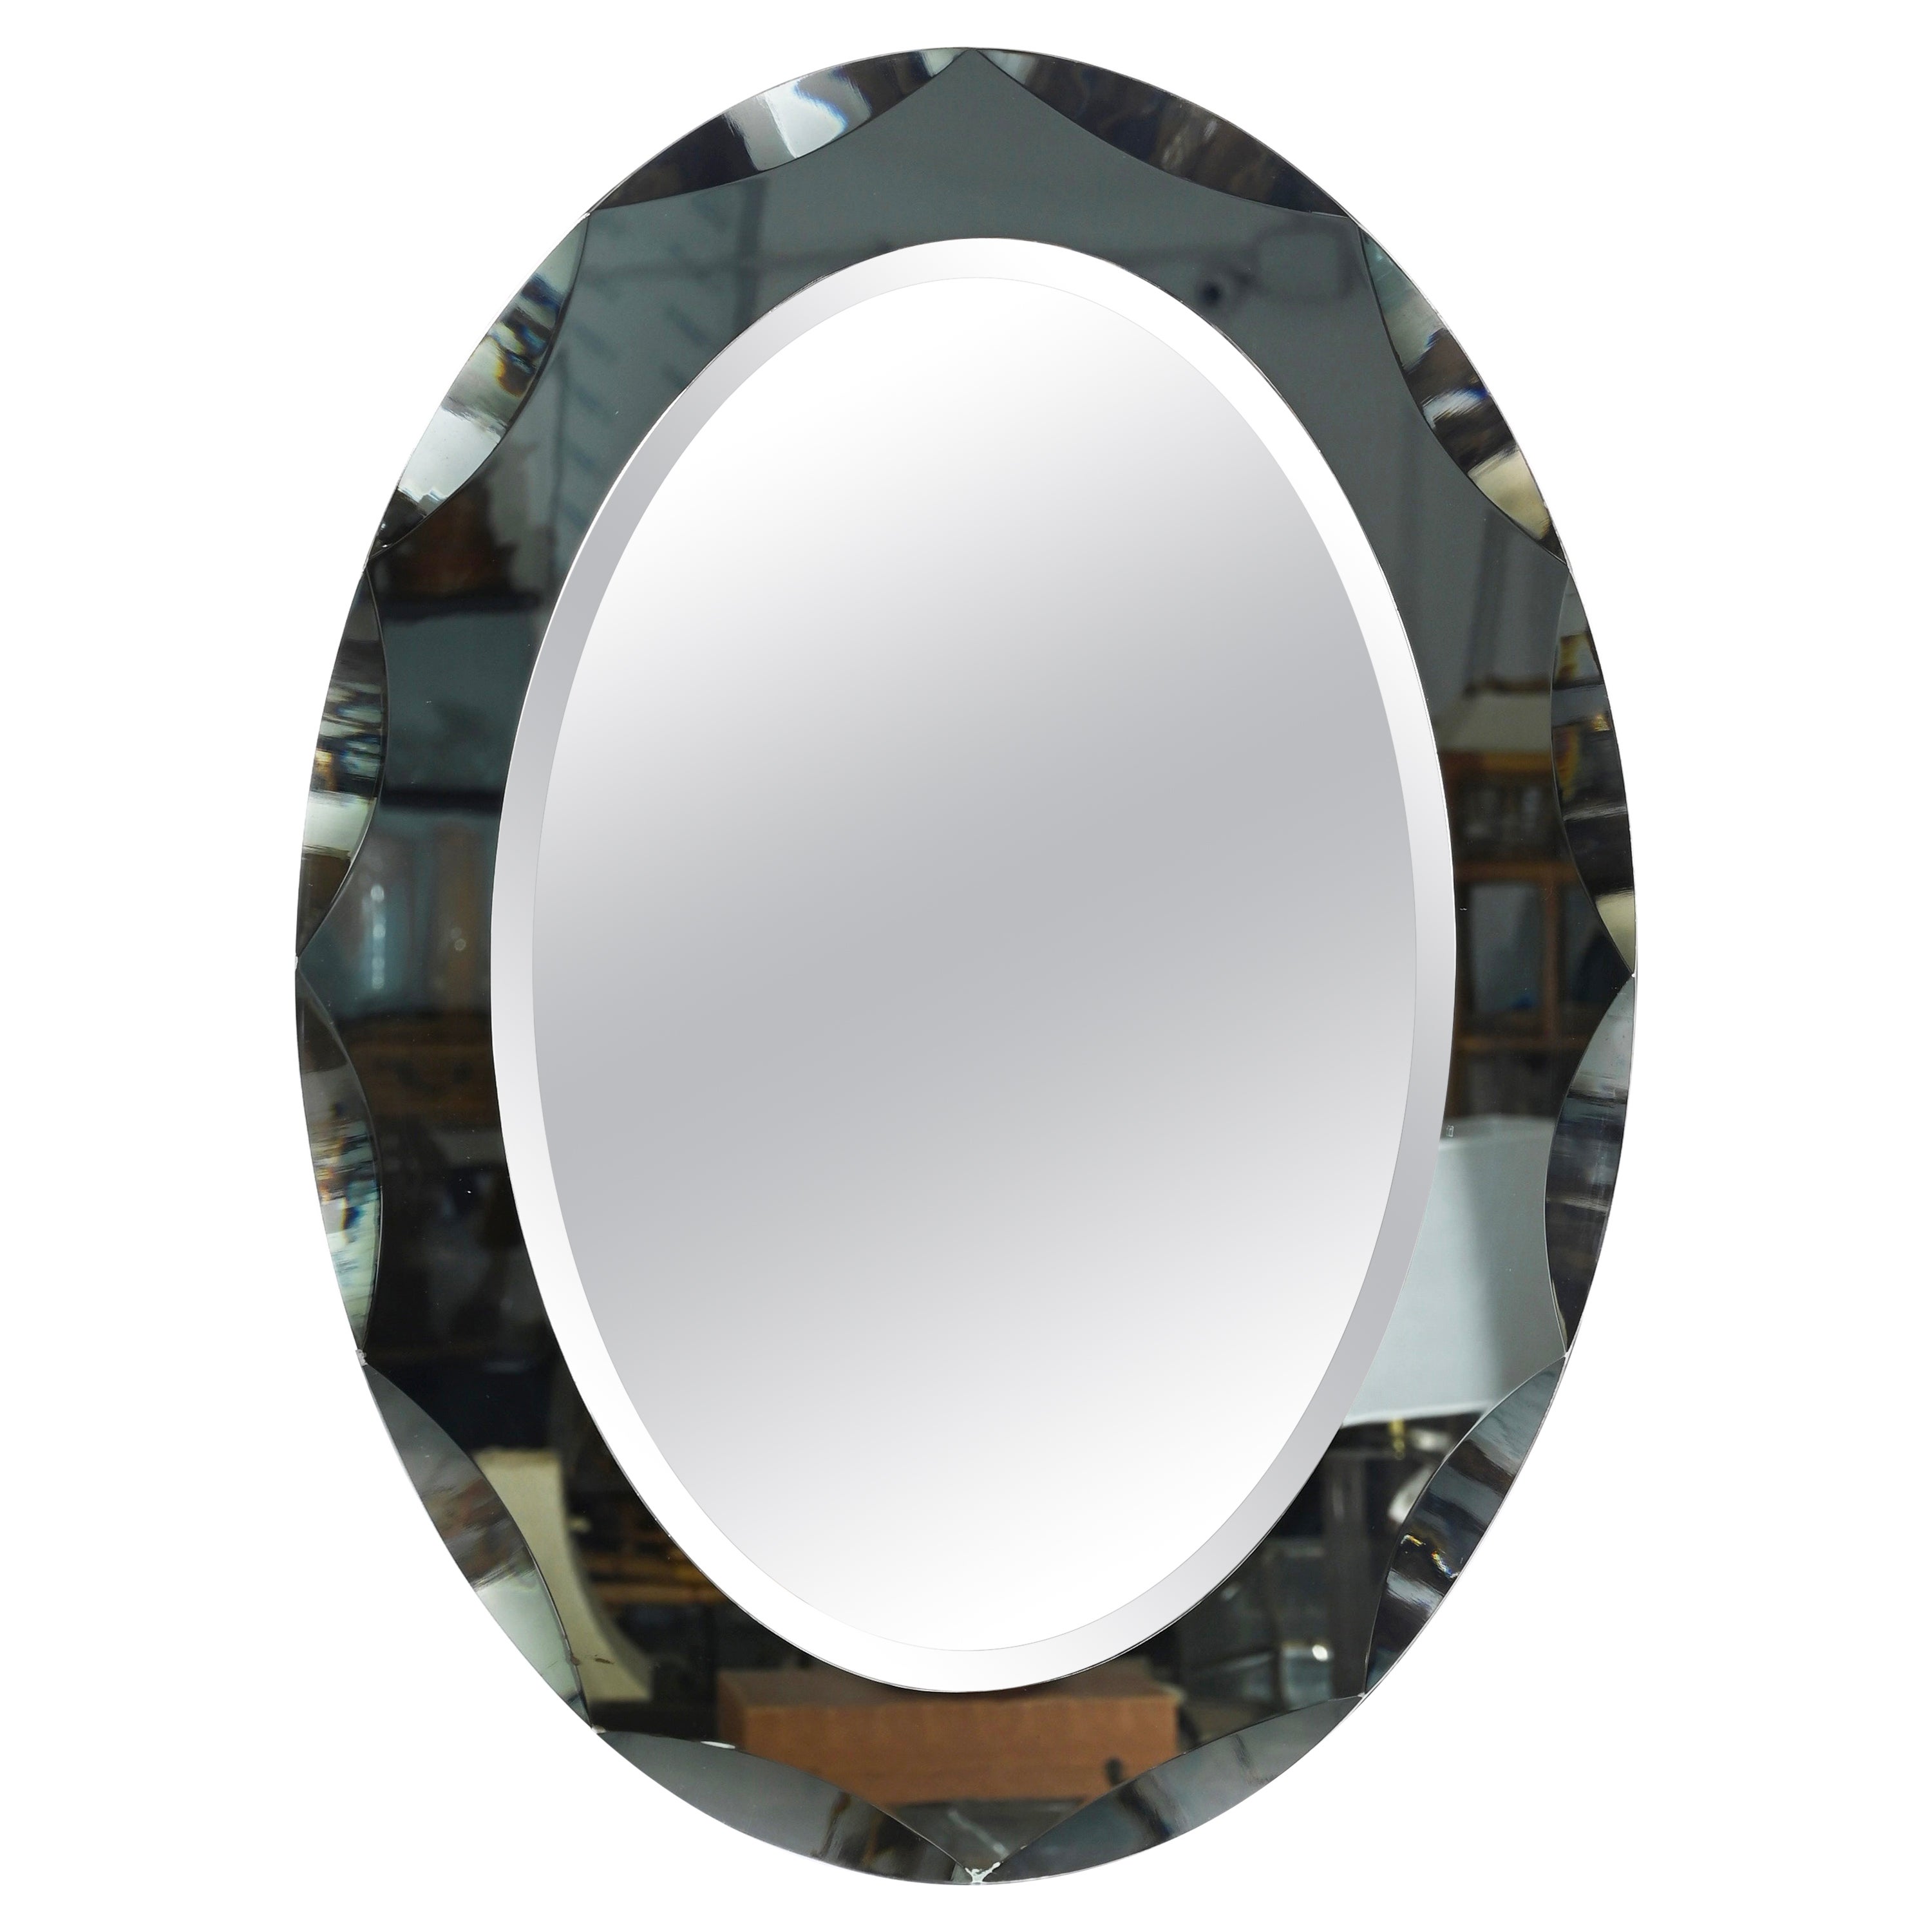 Galvorame BlueGray Oval Mirror with Beveled Frame, Italy 1960s